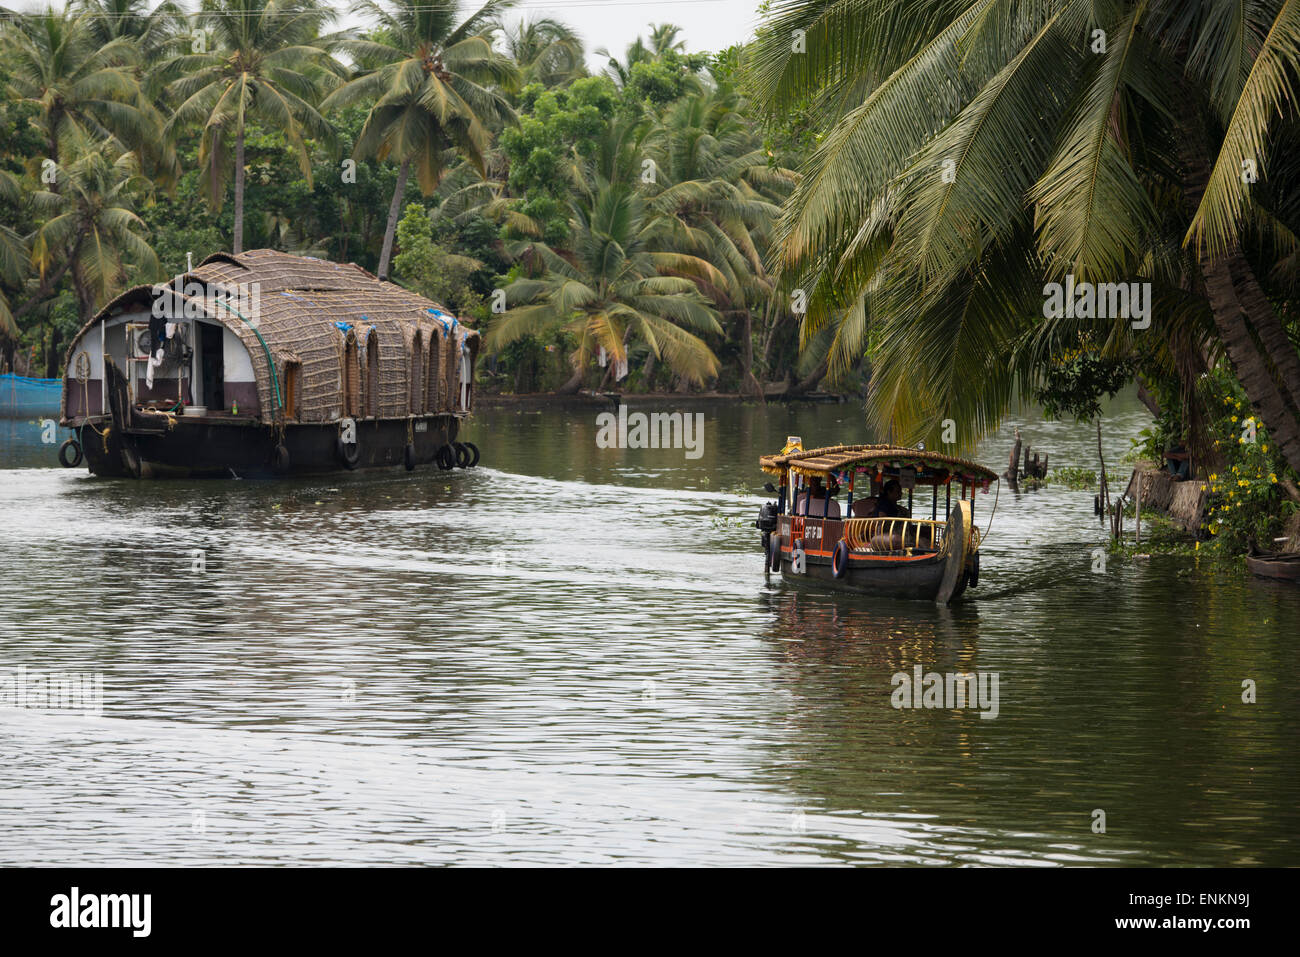 India, Kerala, Alleppey. Backwater canals of Kerala in the area of Kumarakom, known as the 'Venice of the East'. Houseboats. Stock Photo